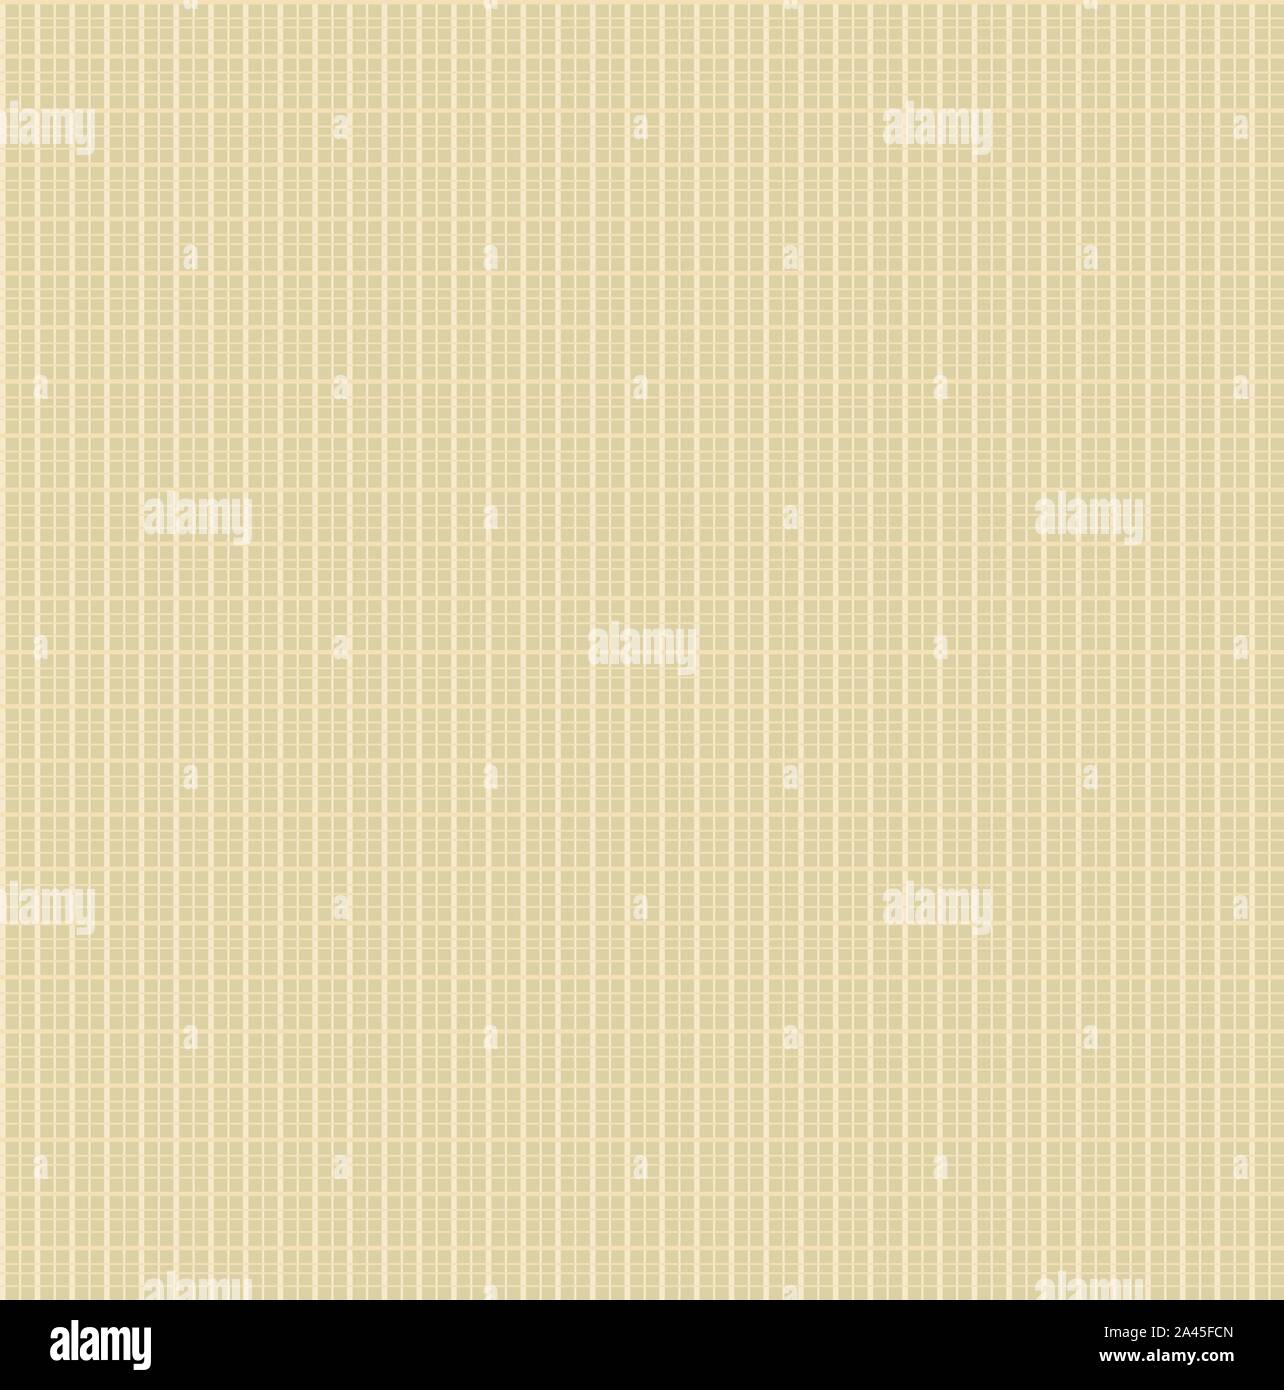 Square Brown Beige Seamless Fabric Texture Pattern Stock